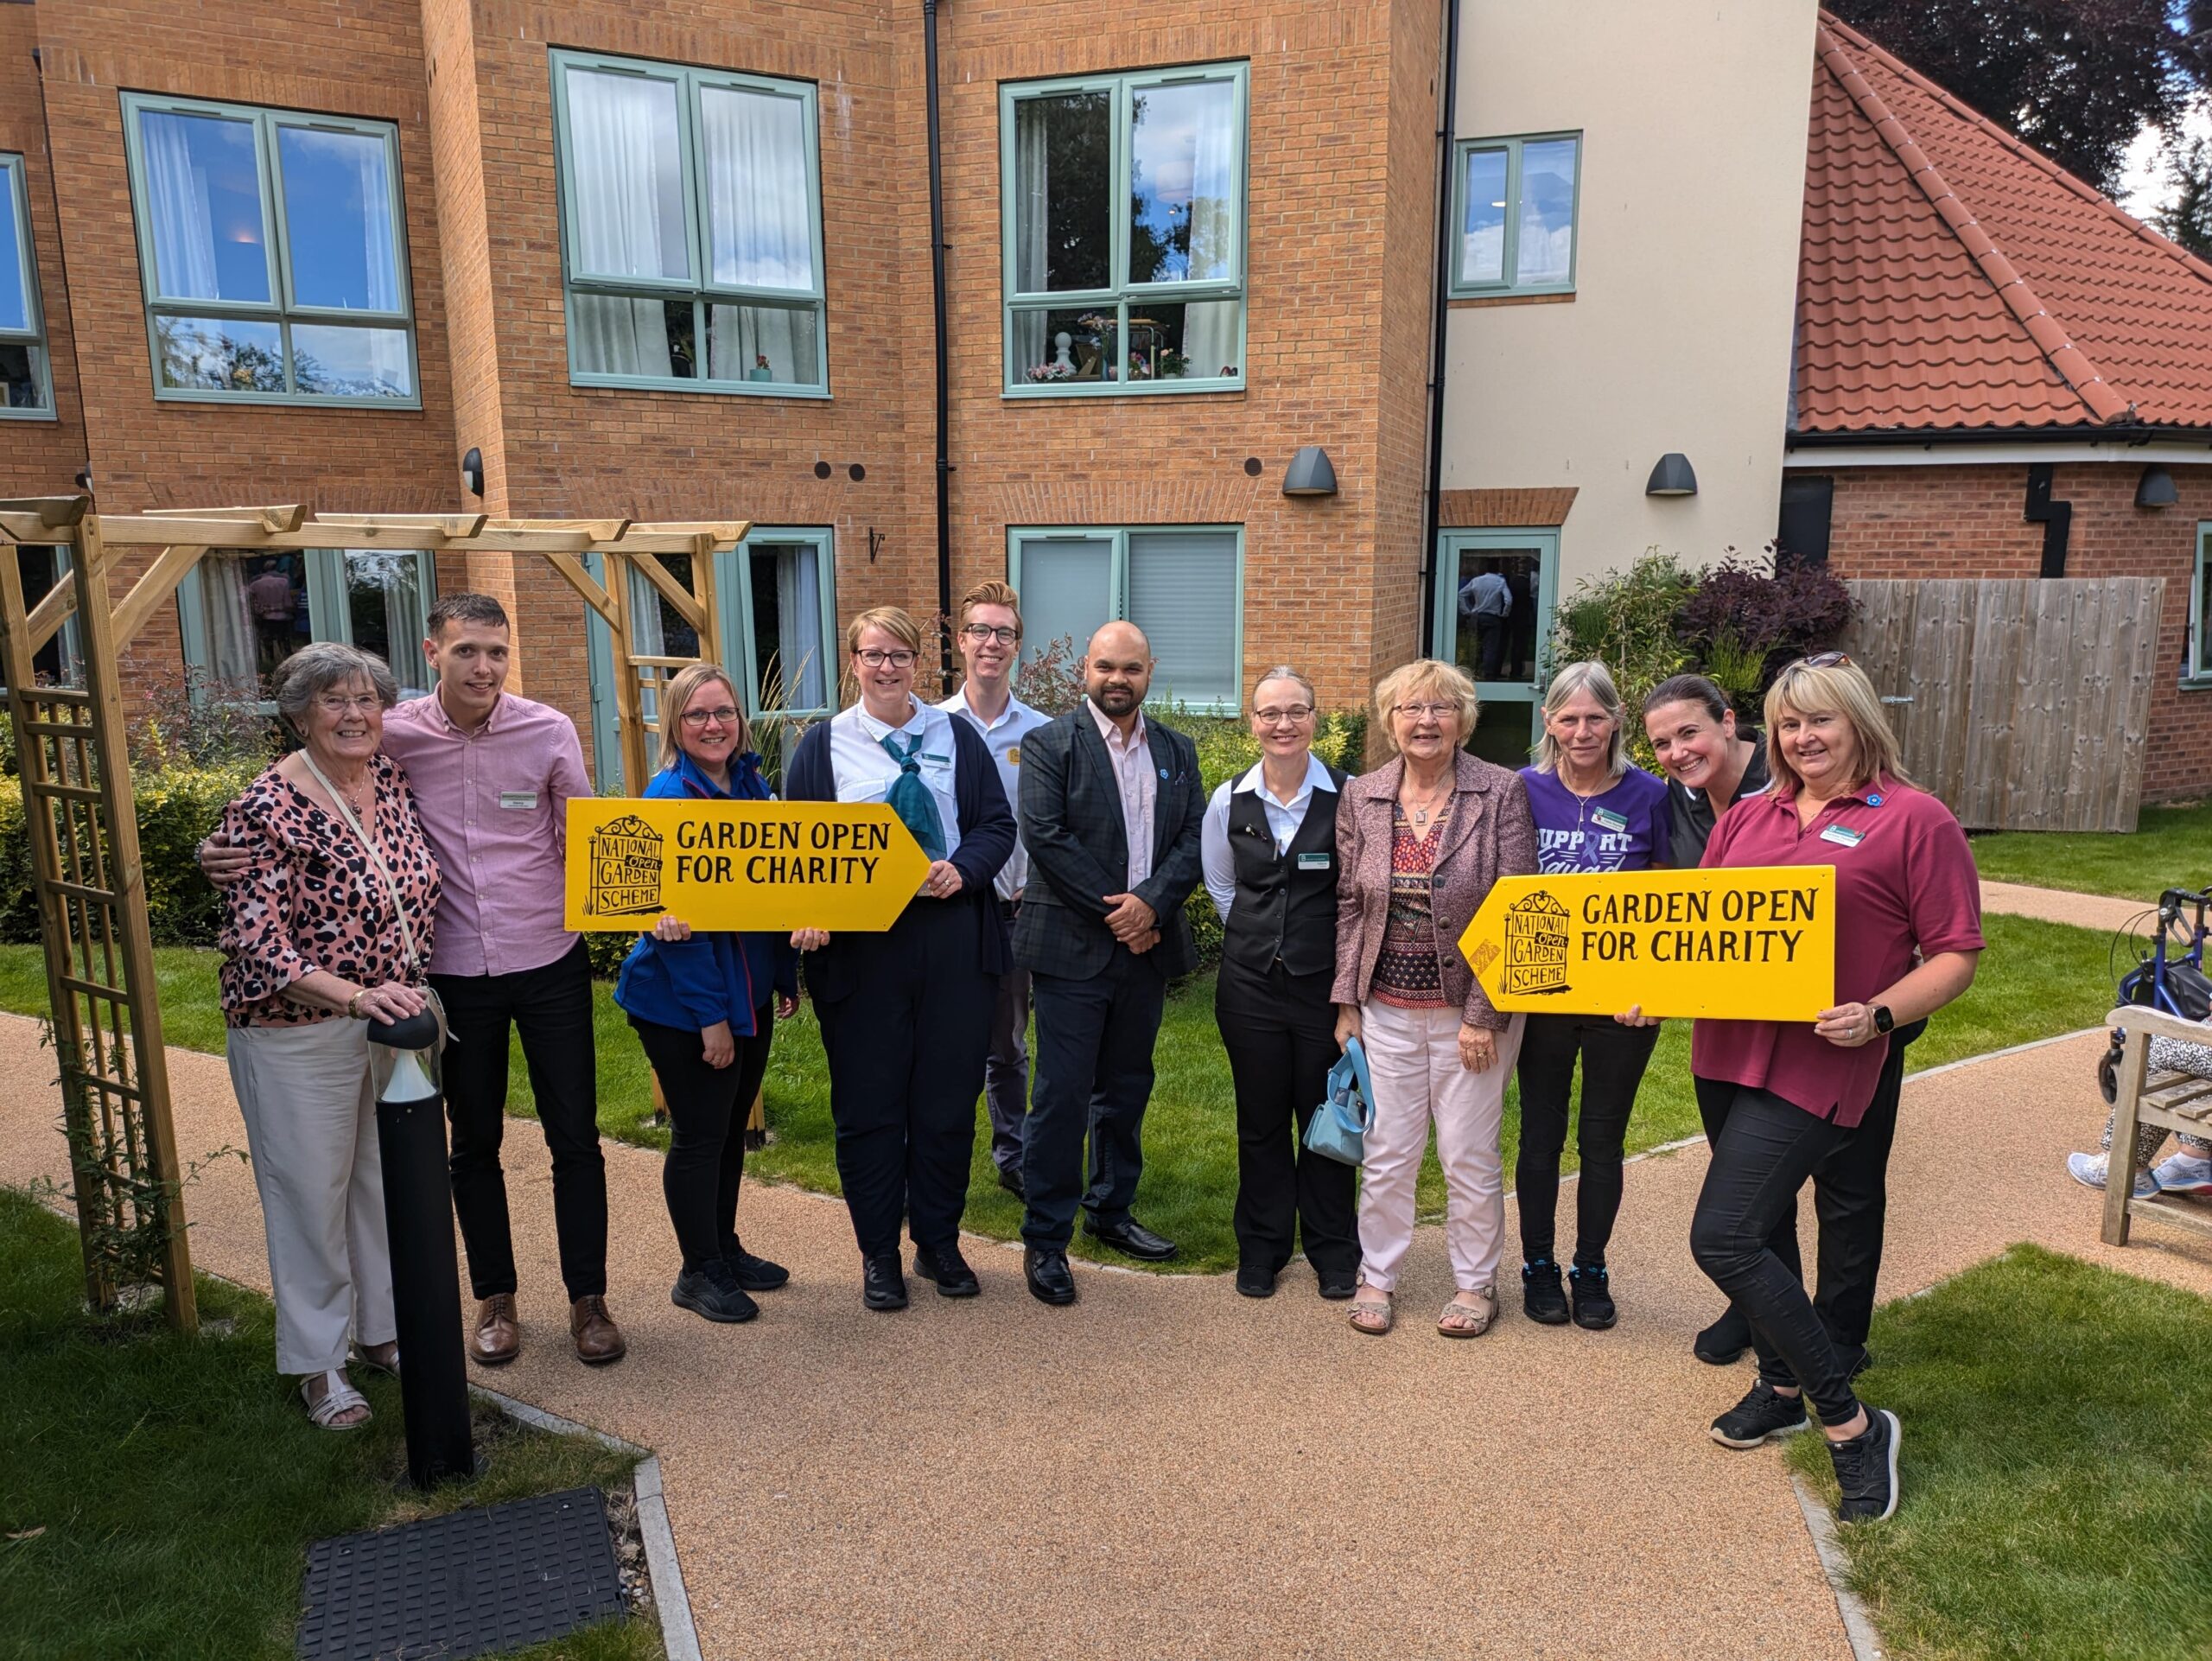 Brampton Manor Opens Gardens For Charity With The National Garden Scheme